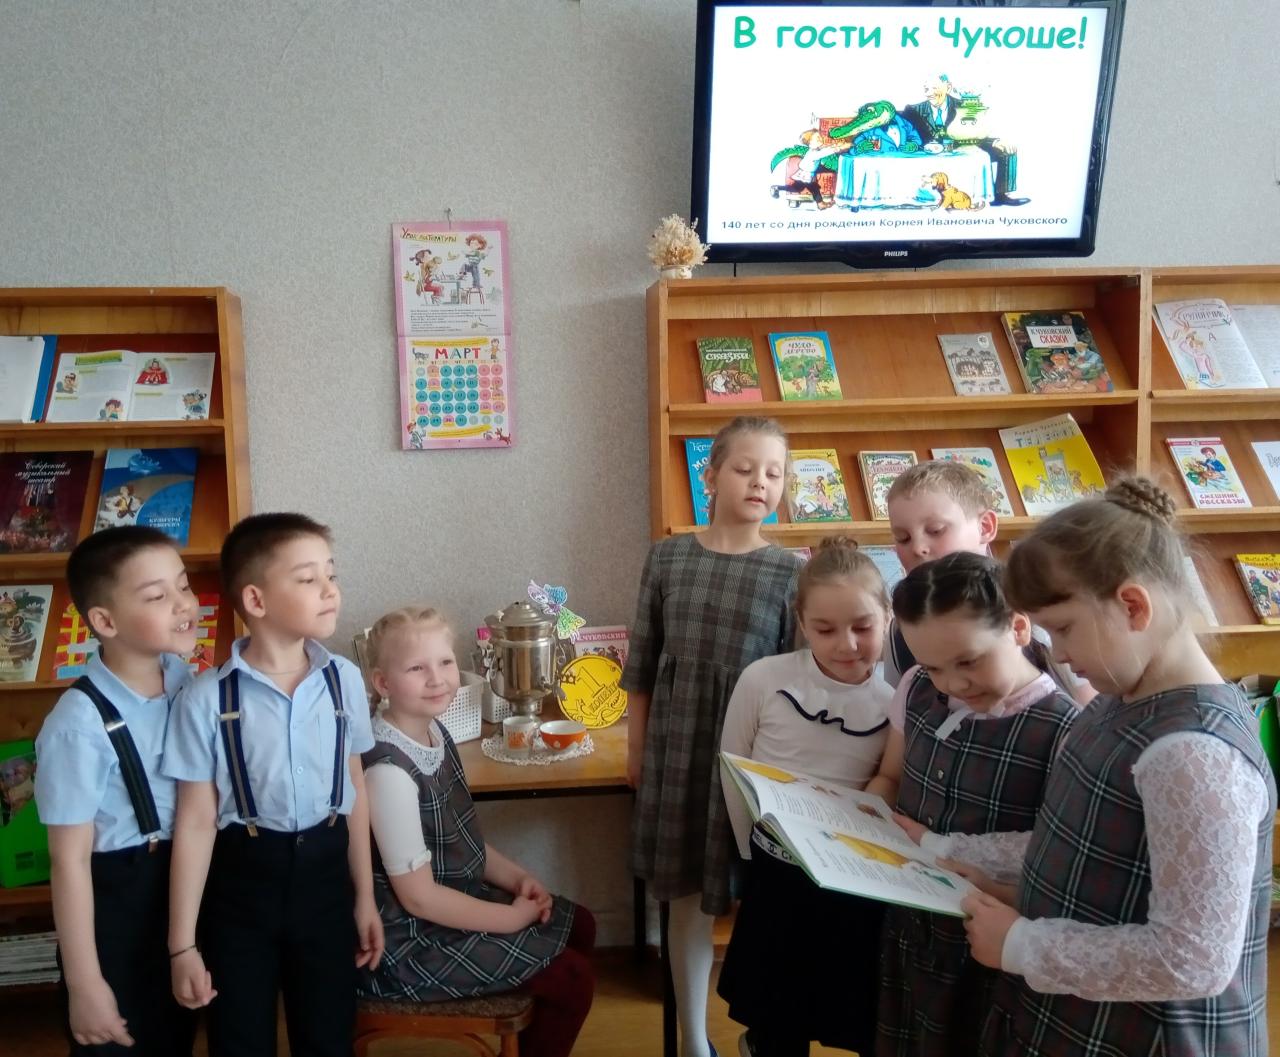 Educational schools №90 took an active part in the Municipal Environmental Promotion Green Russia, which is held in September as part of the municipal project Social Activity. High school students decided to bring order on a school territory. Here is what the guys themselves say about the event that took place: Daria Alabugina, 11A class: Our class happily agreed to take part in the Green Russia shares because to see the purity in the school and realize what we did, do it yourself, it is great! This action has become another opportunity for our class together spending time outside lessons and make a good deed for school and Russia.  Alexander Shastin, 11A class: We had fun and warmly despite not very good weather.I would like more such wonderful activities for the environment.  Students of primary school creatively approached participation in the Green Russia shares. They not only brought close-friendly products from home, but also created real masterpieces. For a whole week, the exhibition Autumn Fantasy rejoiced us with multi-colored paints!